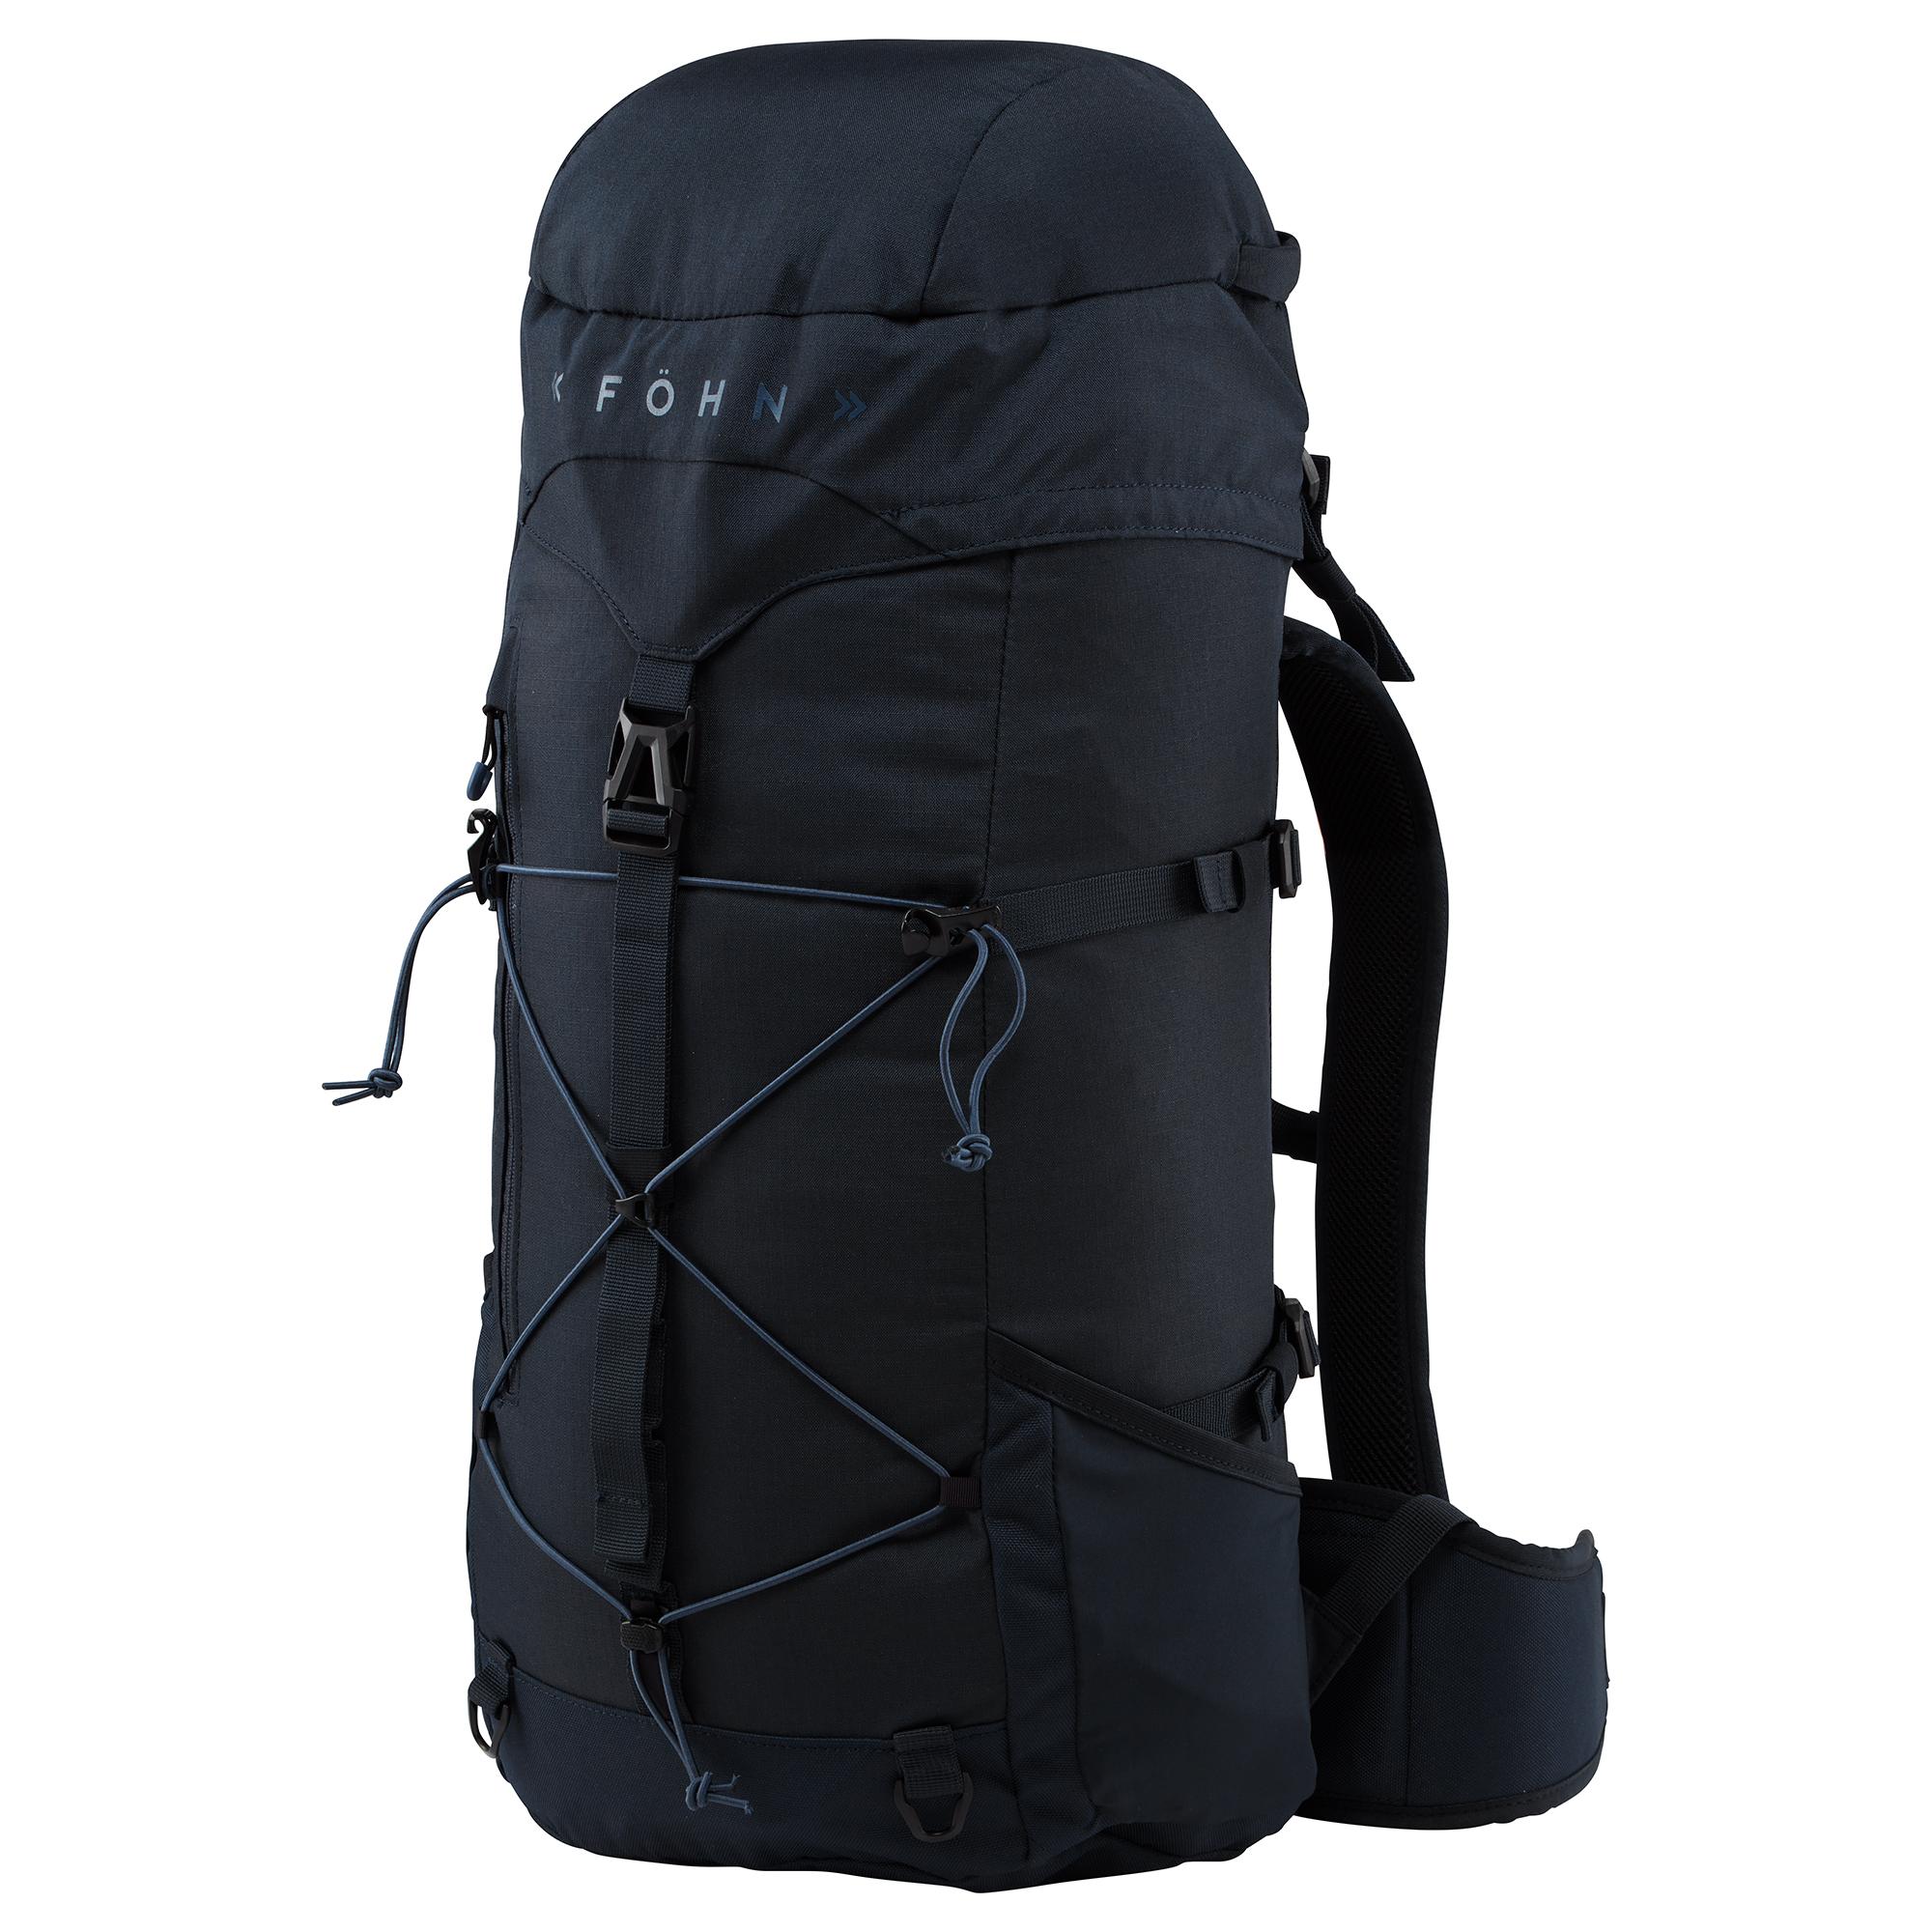 Fhn Hiking Pack (33l) - Navy